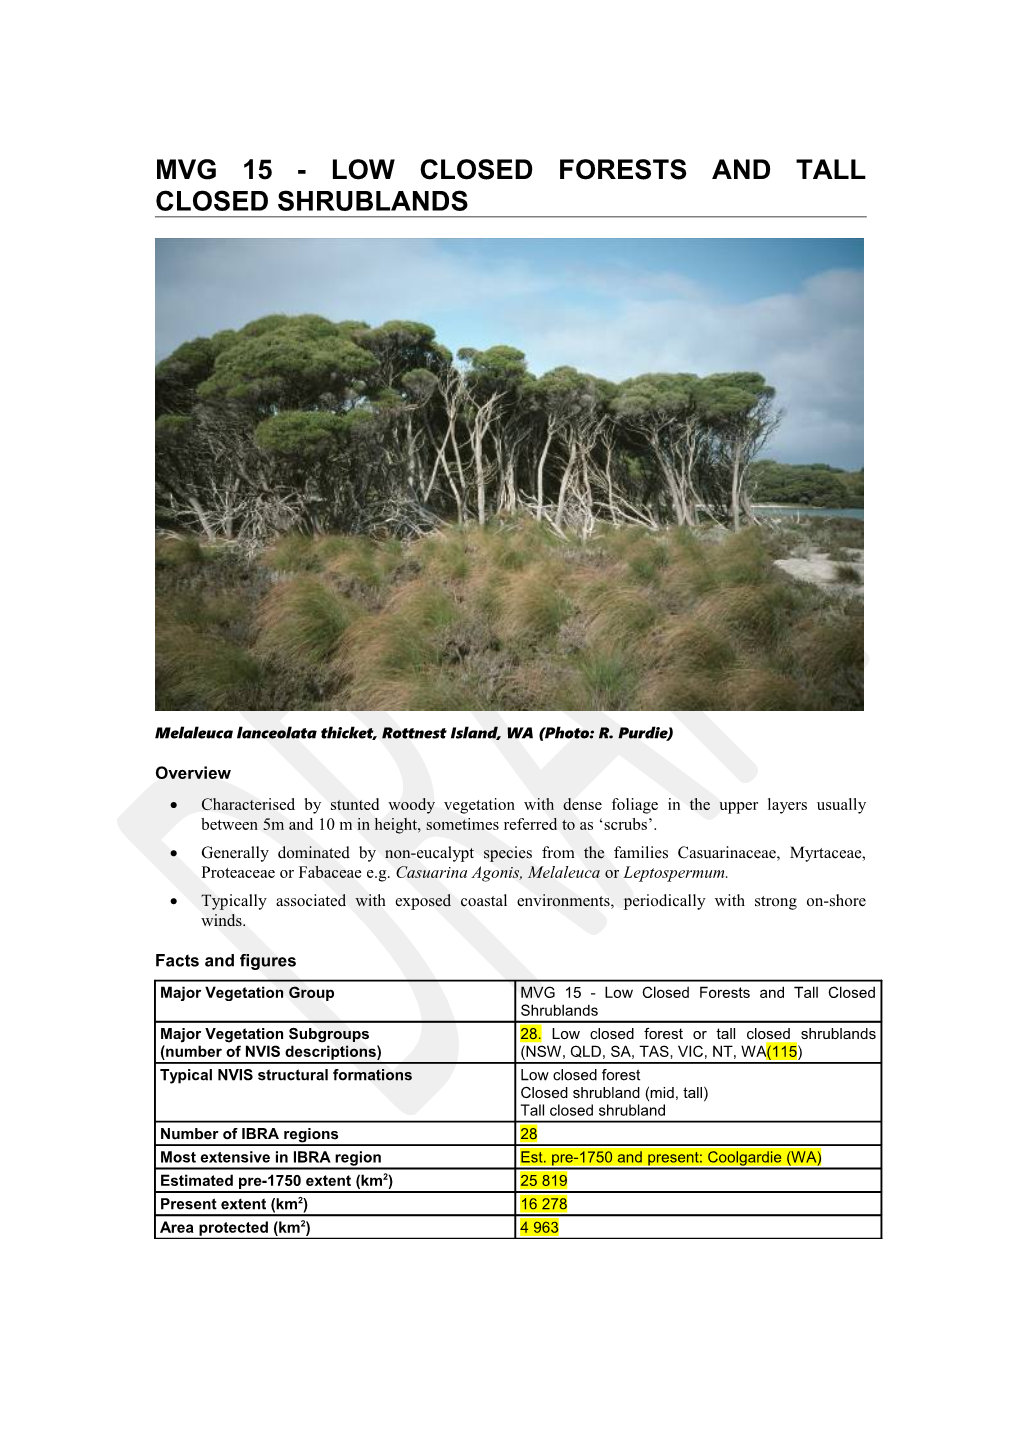 MVG 15 Low Closed Forests and Tall Closed Shrublands DRAFT